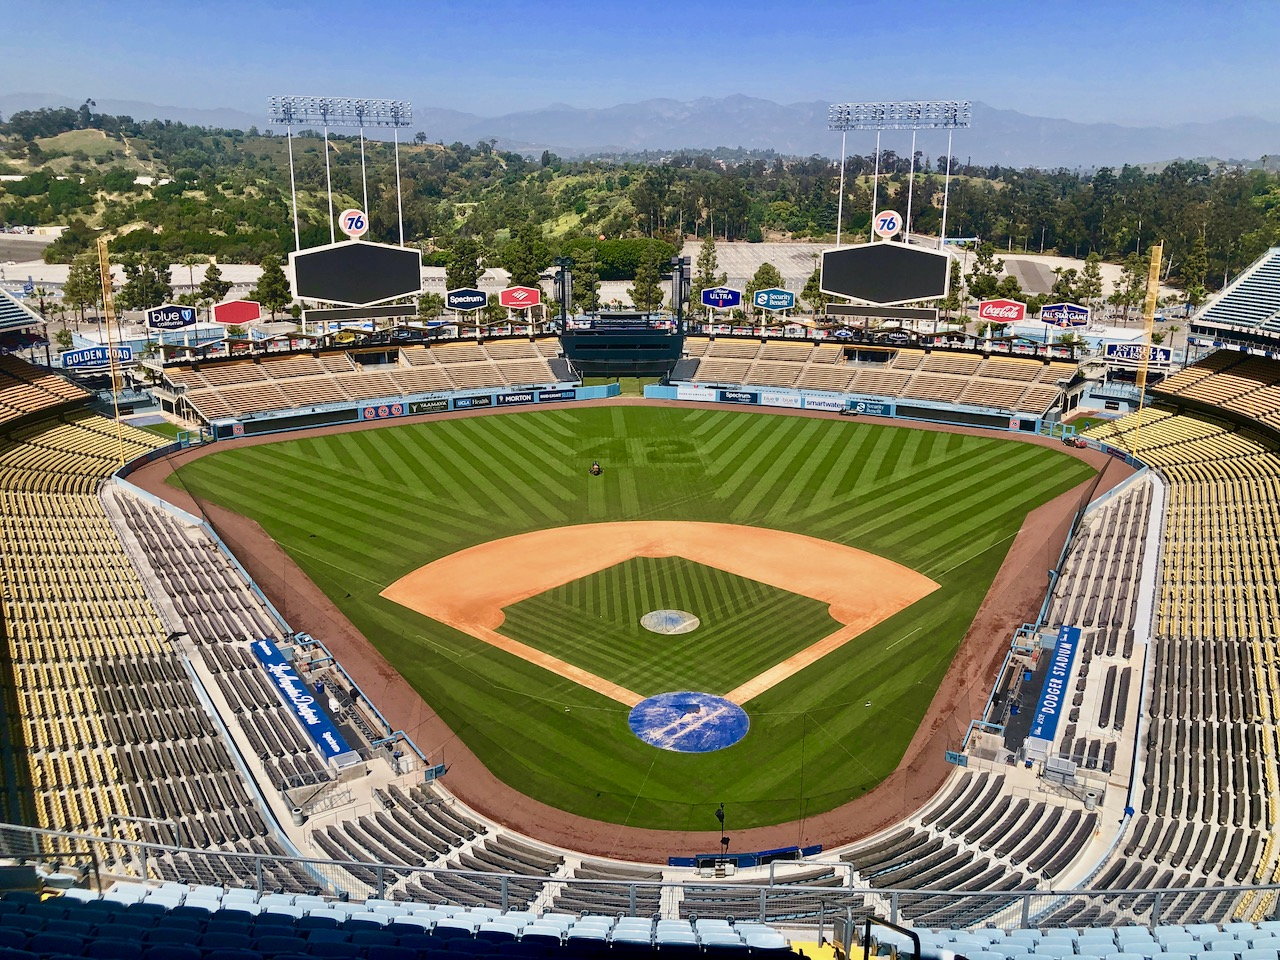 Trip Report A Padre Fan Takes A Tour Of Dodger Stadium - Fodor's